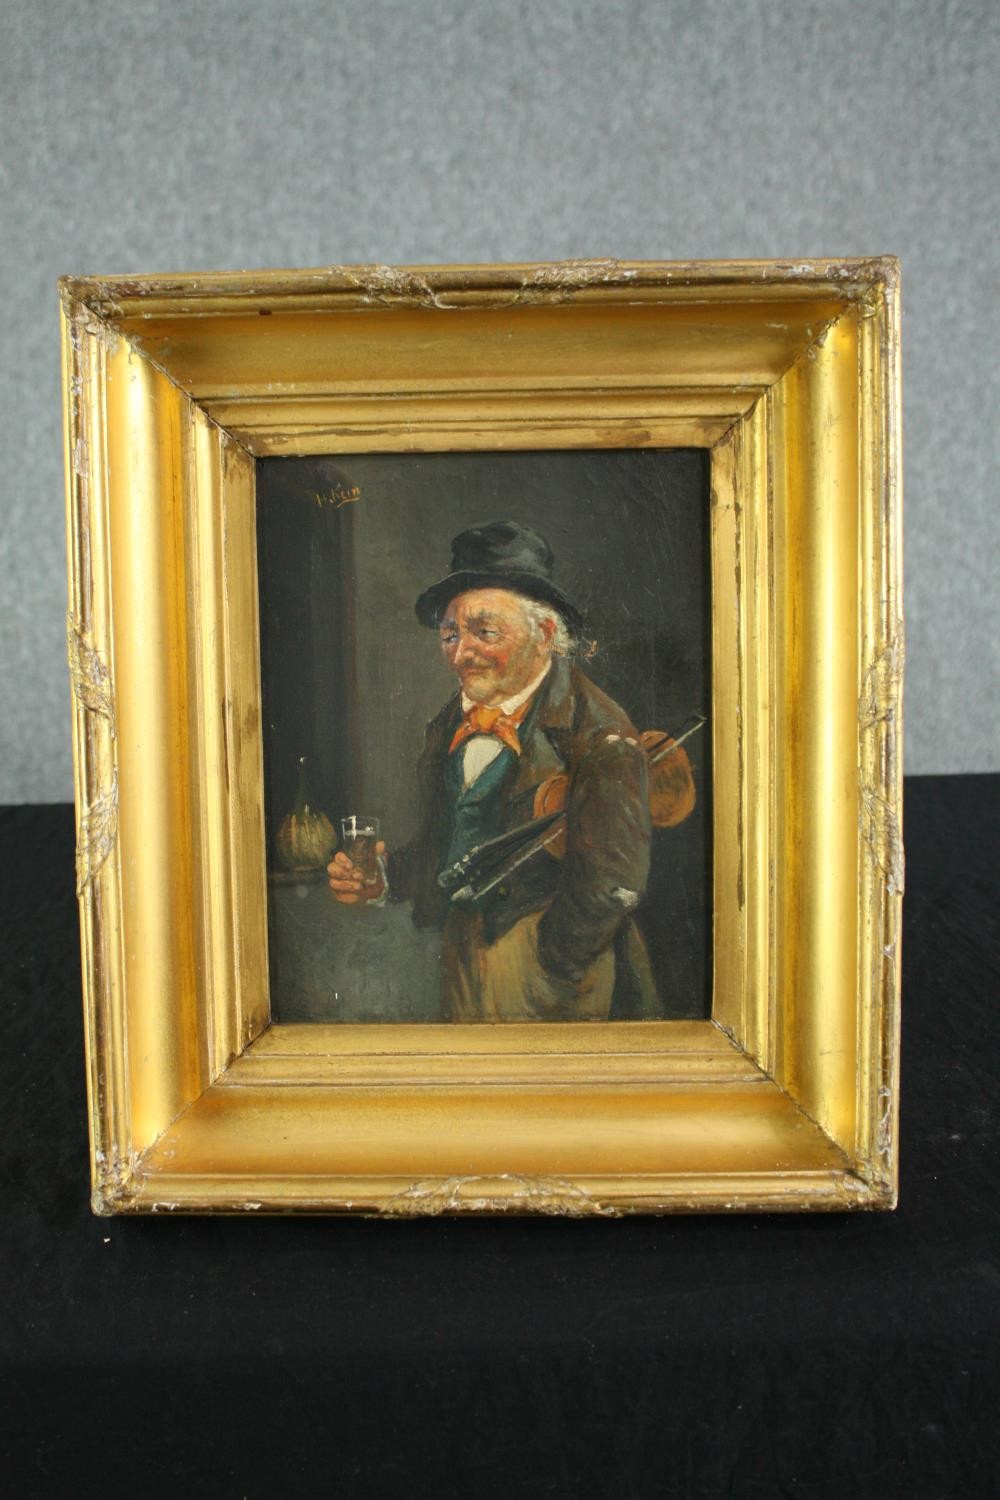 An early to mid nineteenth century oil on canvas portrait of what looks like an inebriated musician. - Image 2 of 3